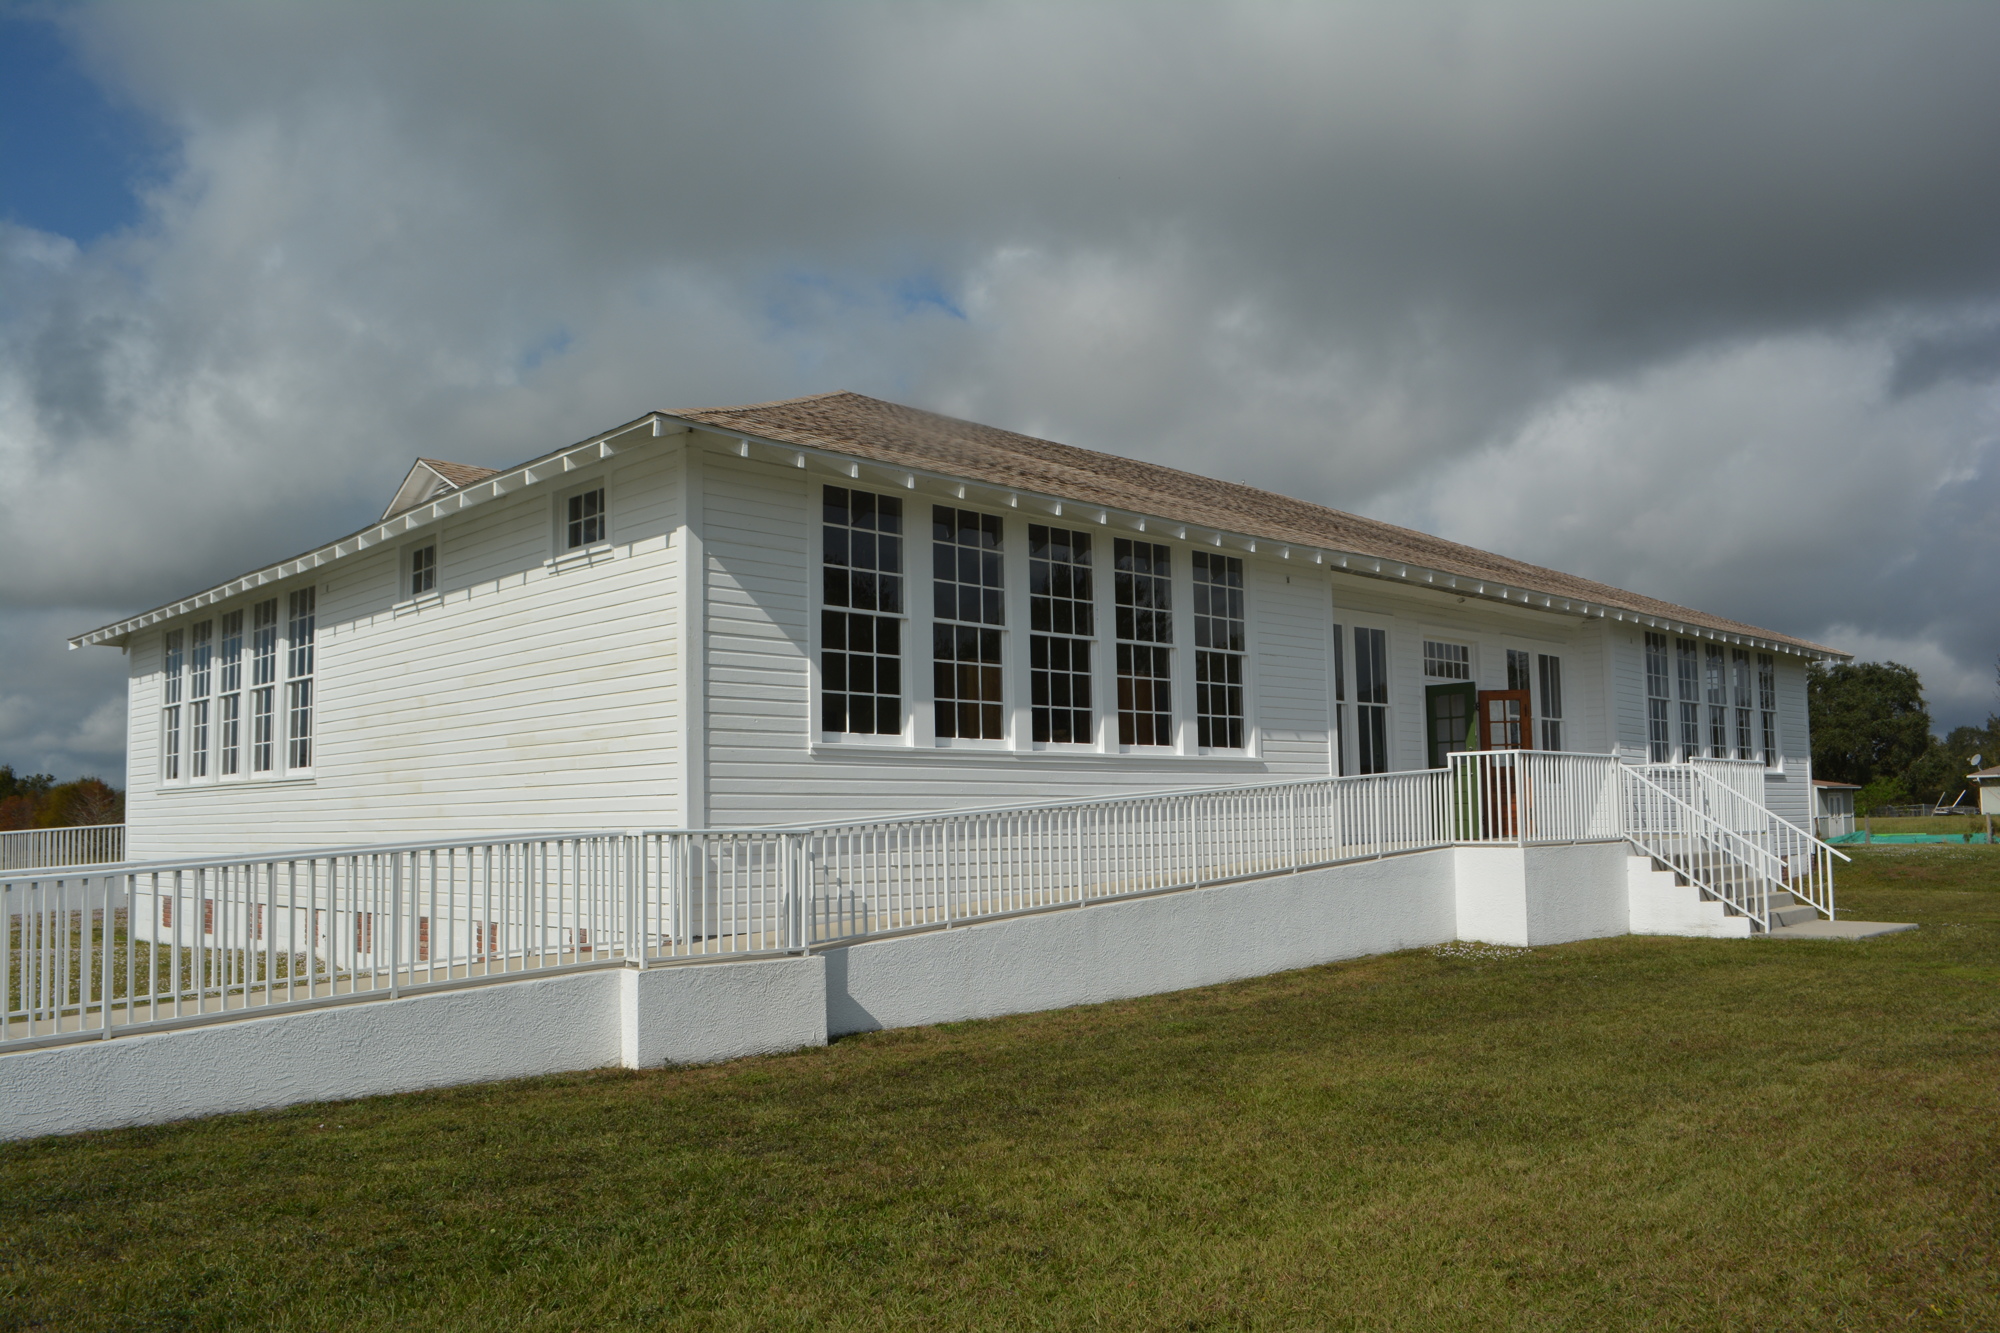 The Myakka City Historical Society hopes to have the building open by November.